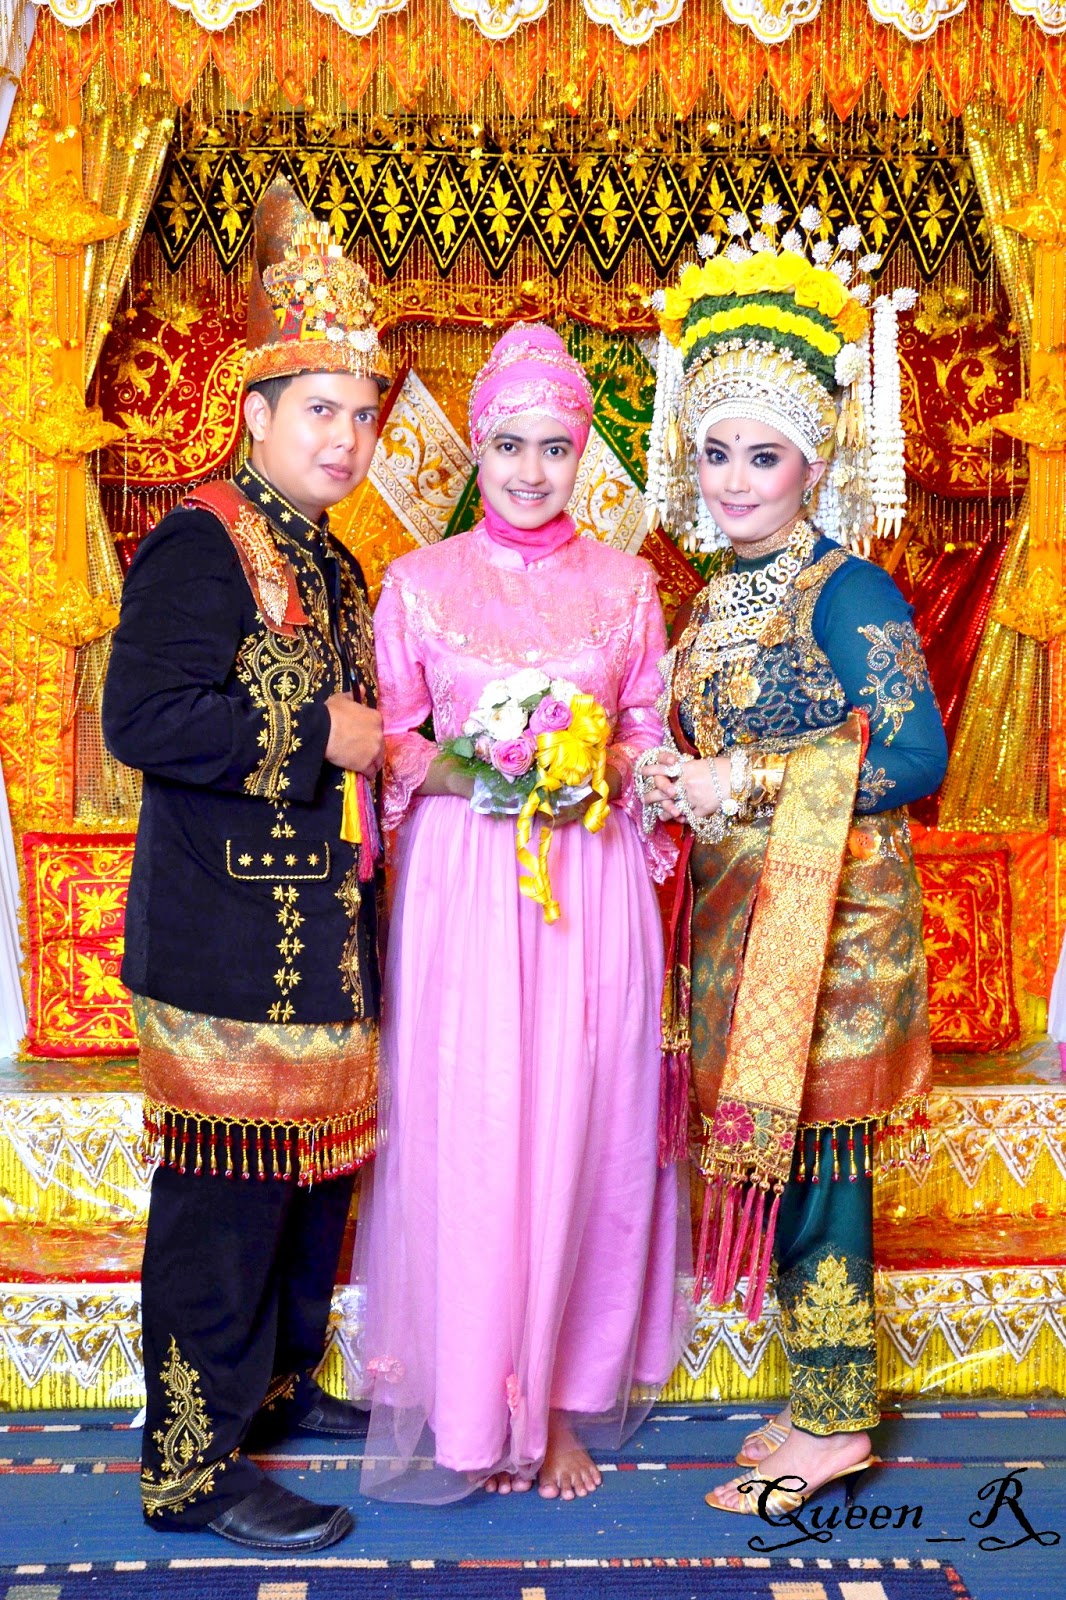 Queen_R: Acehnese Culture Marriage